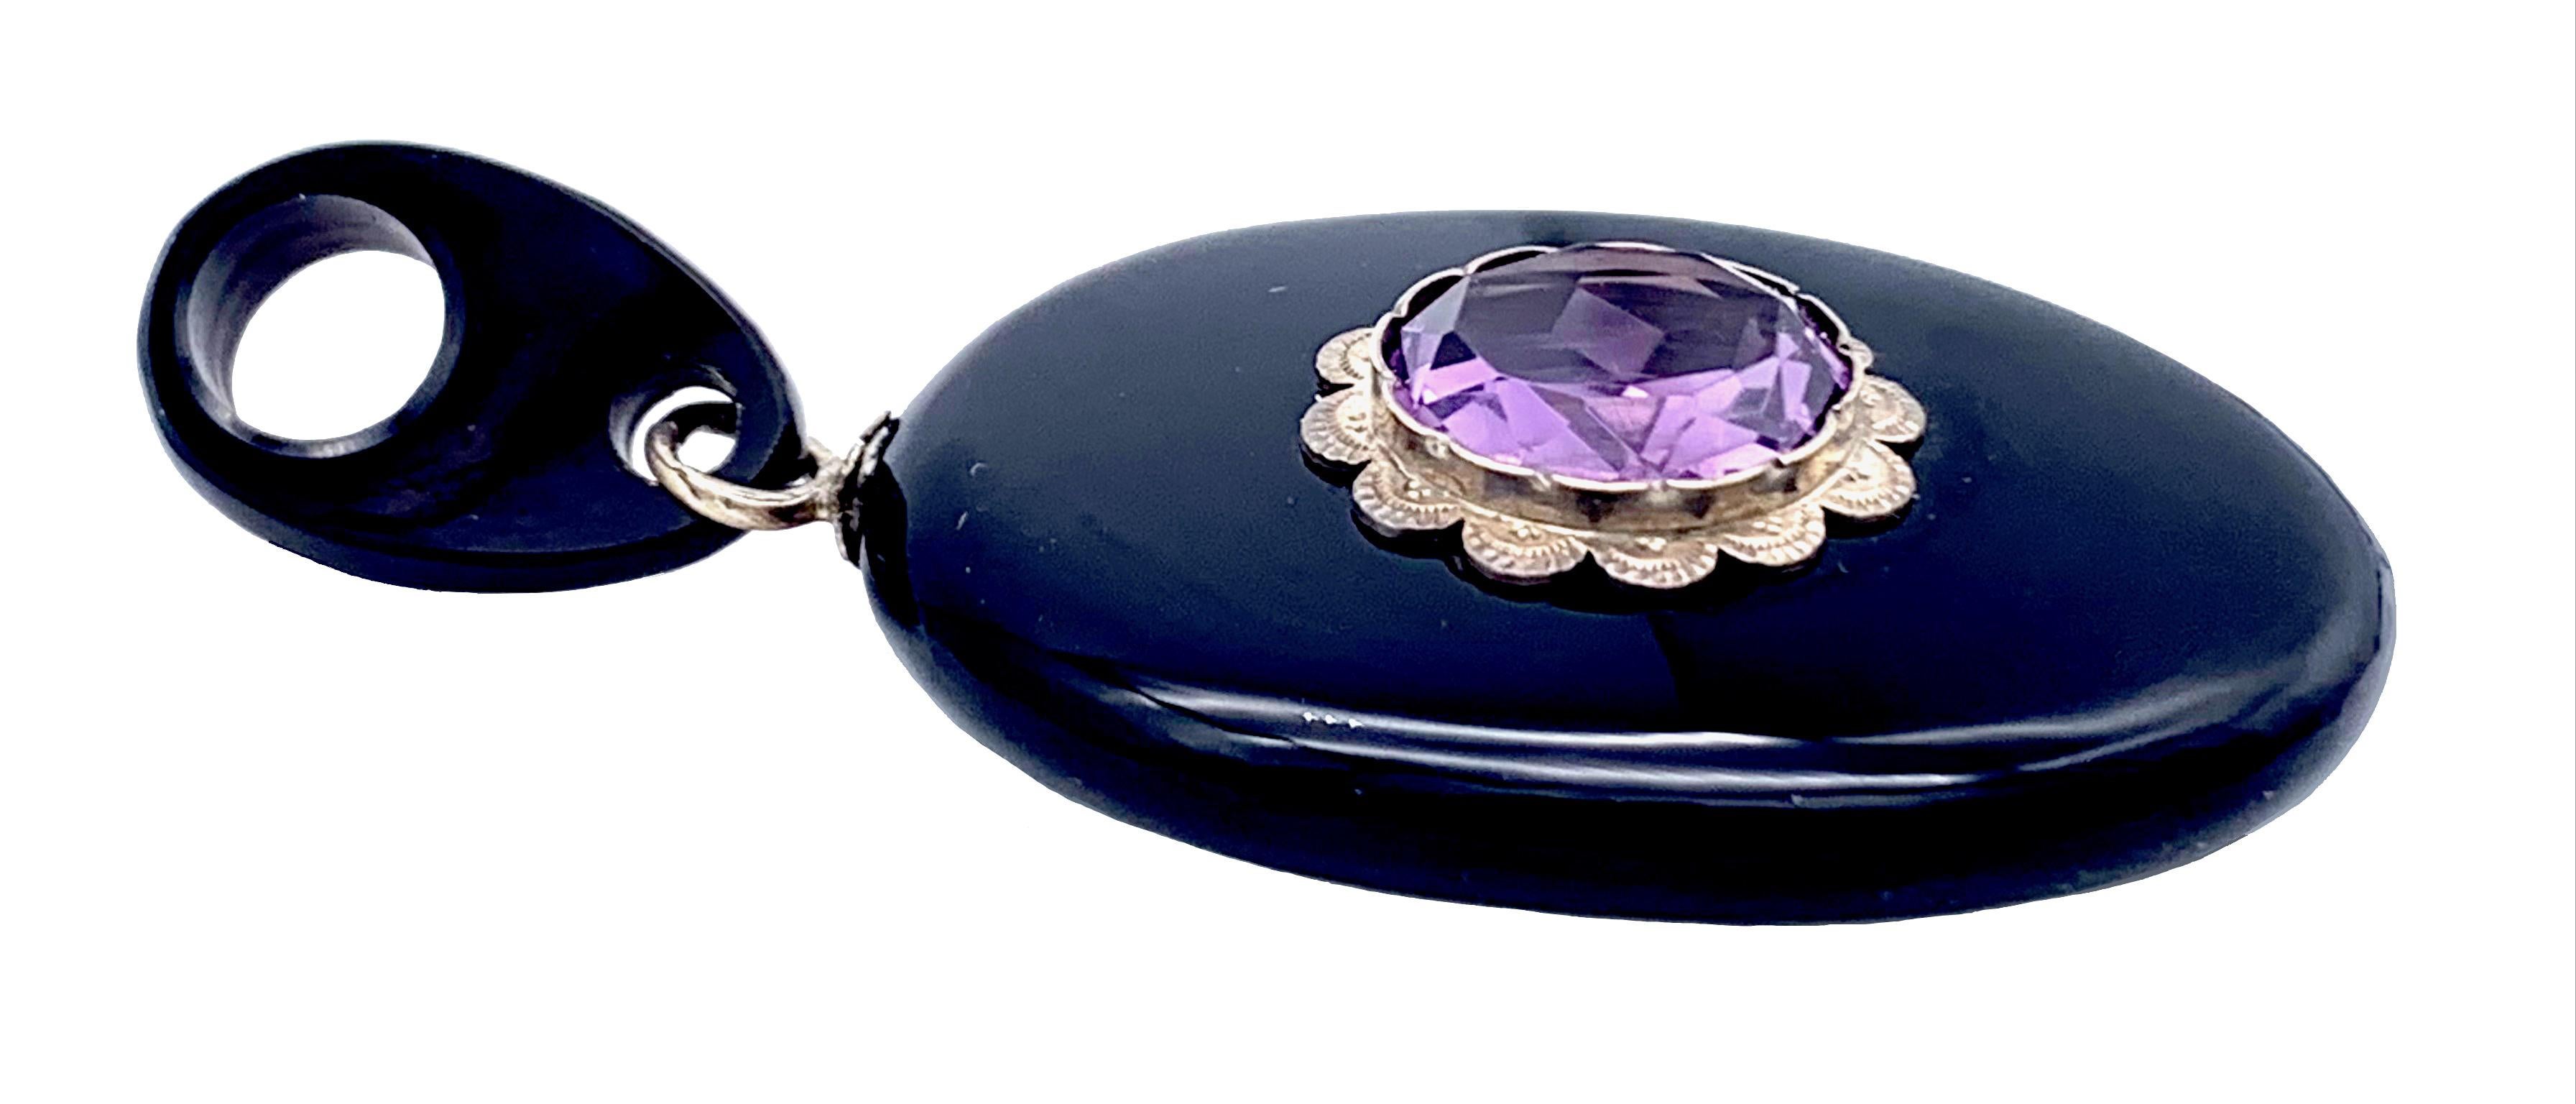 This elegant and onyx locket is decorated with an amethyst mounted in a finely engraved silver setting.